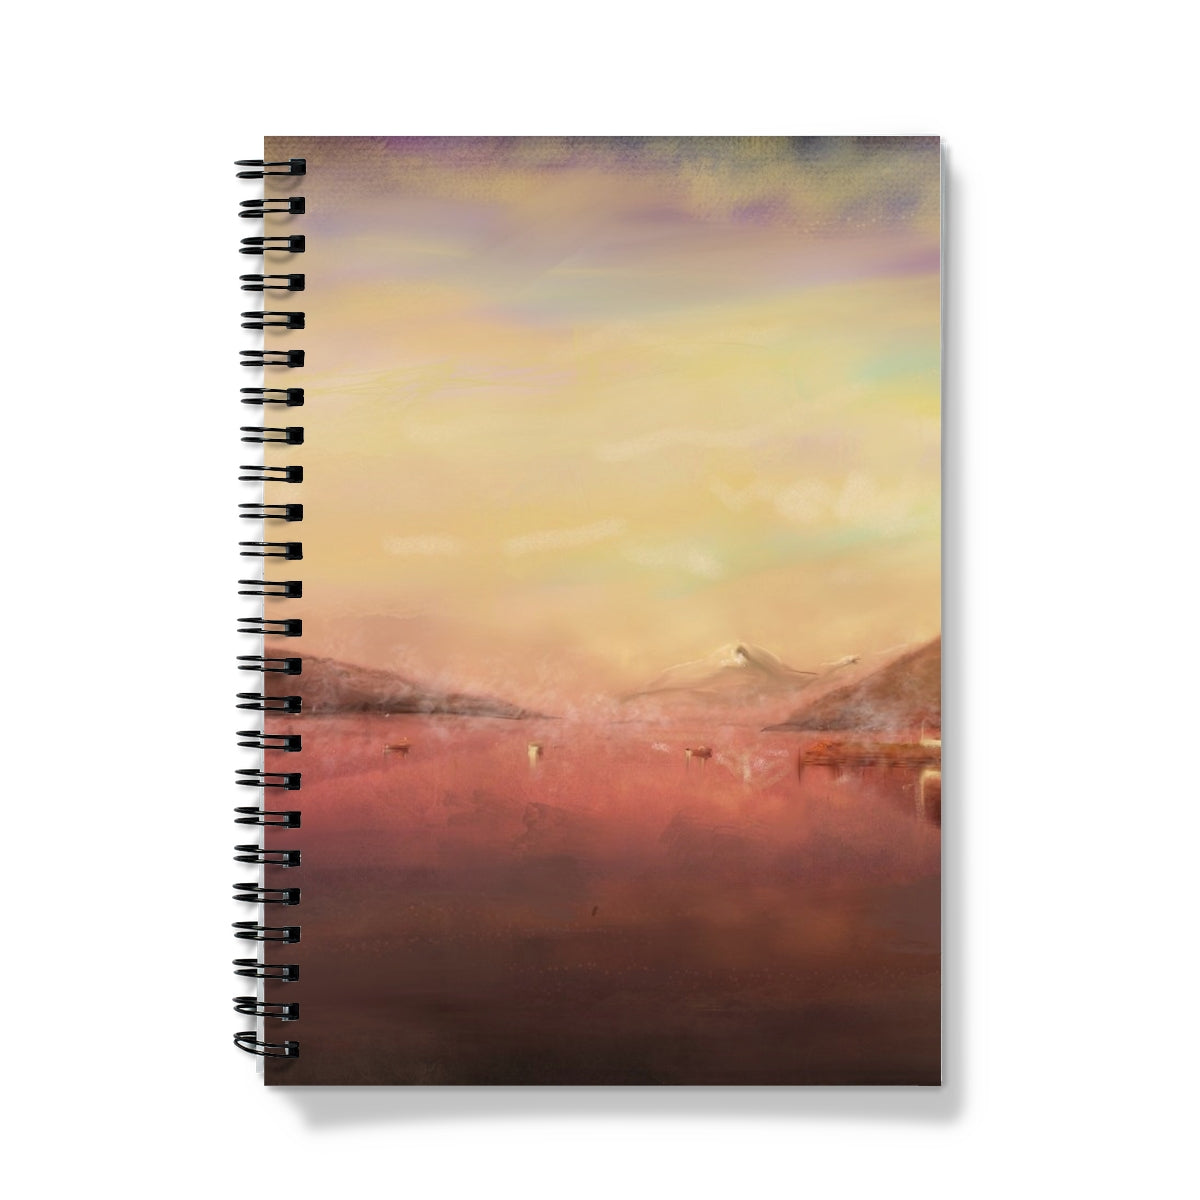 Loch Tay Art Gifts Notebook-Journals & Notebooks-Scottish Lochs & Mountains Art Gallery-A5-Graph-Paintings, Prints, Homeware, Art Gifts From Scotland By Scottish Artist Kevin Hunter